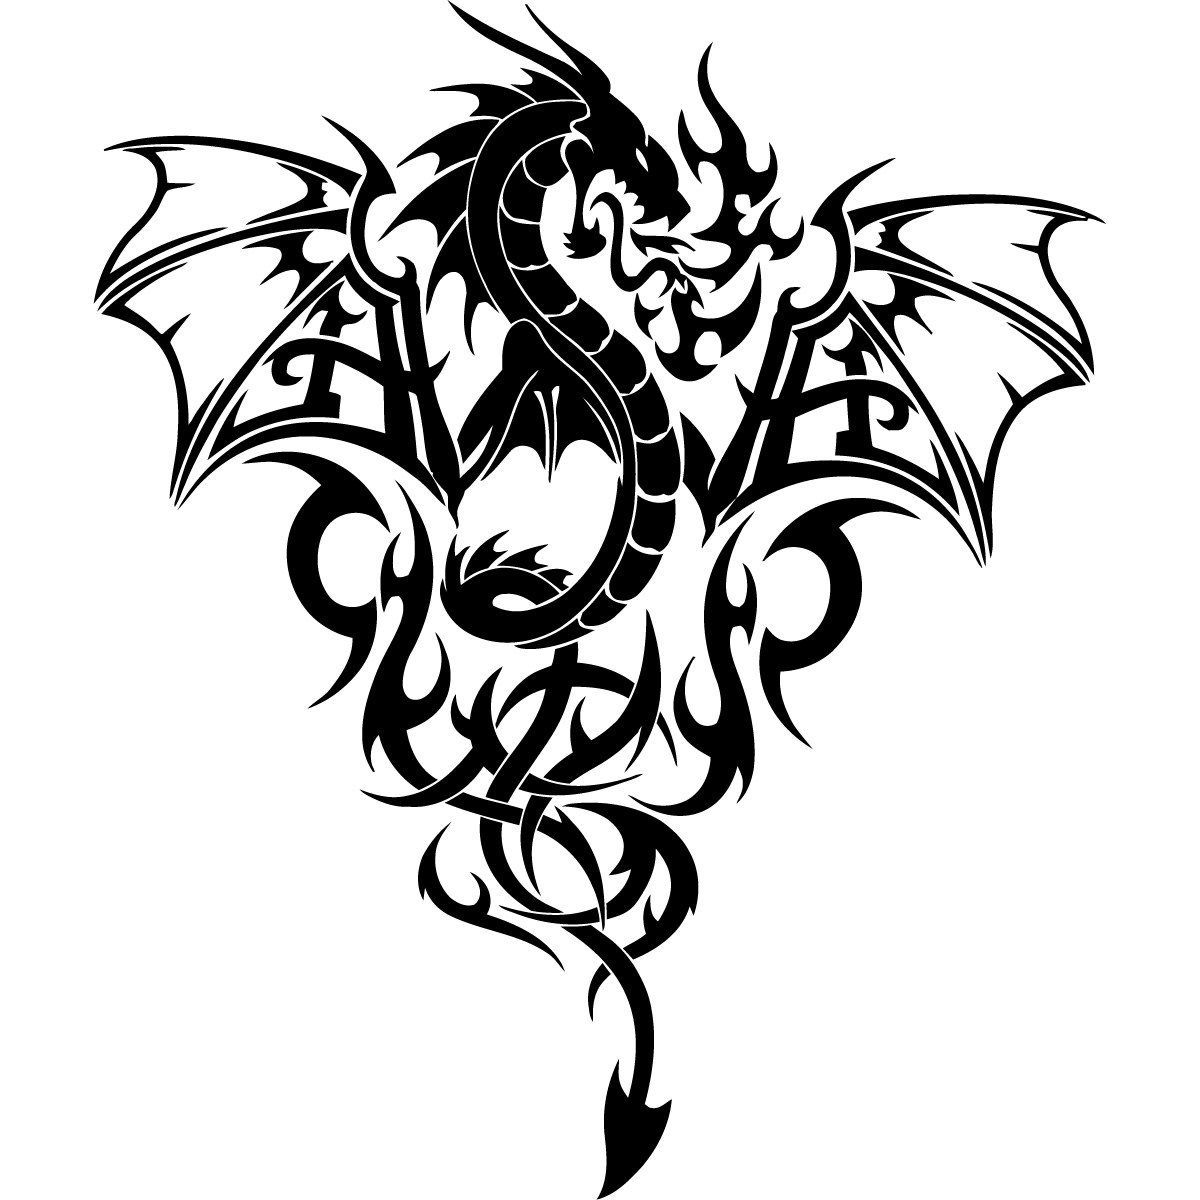 Awesome Black Dragon for Print Design Water Transfer Temporary Tattoo(fake Tattoo) Stickers NO.11136